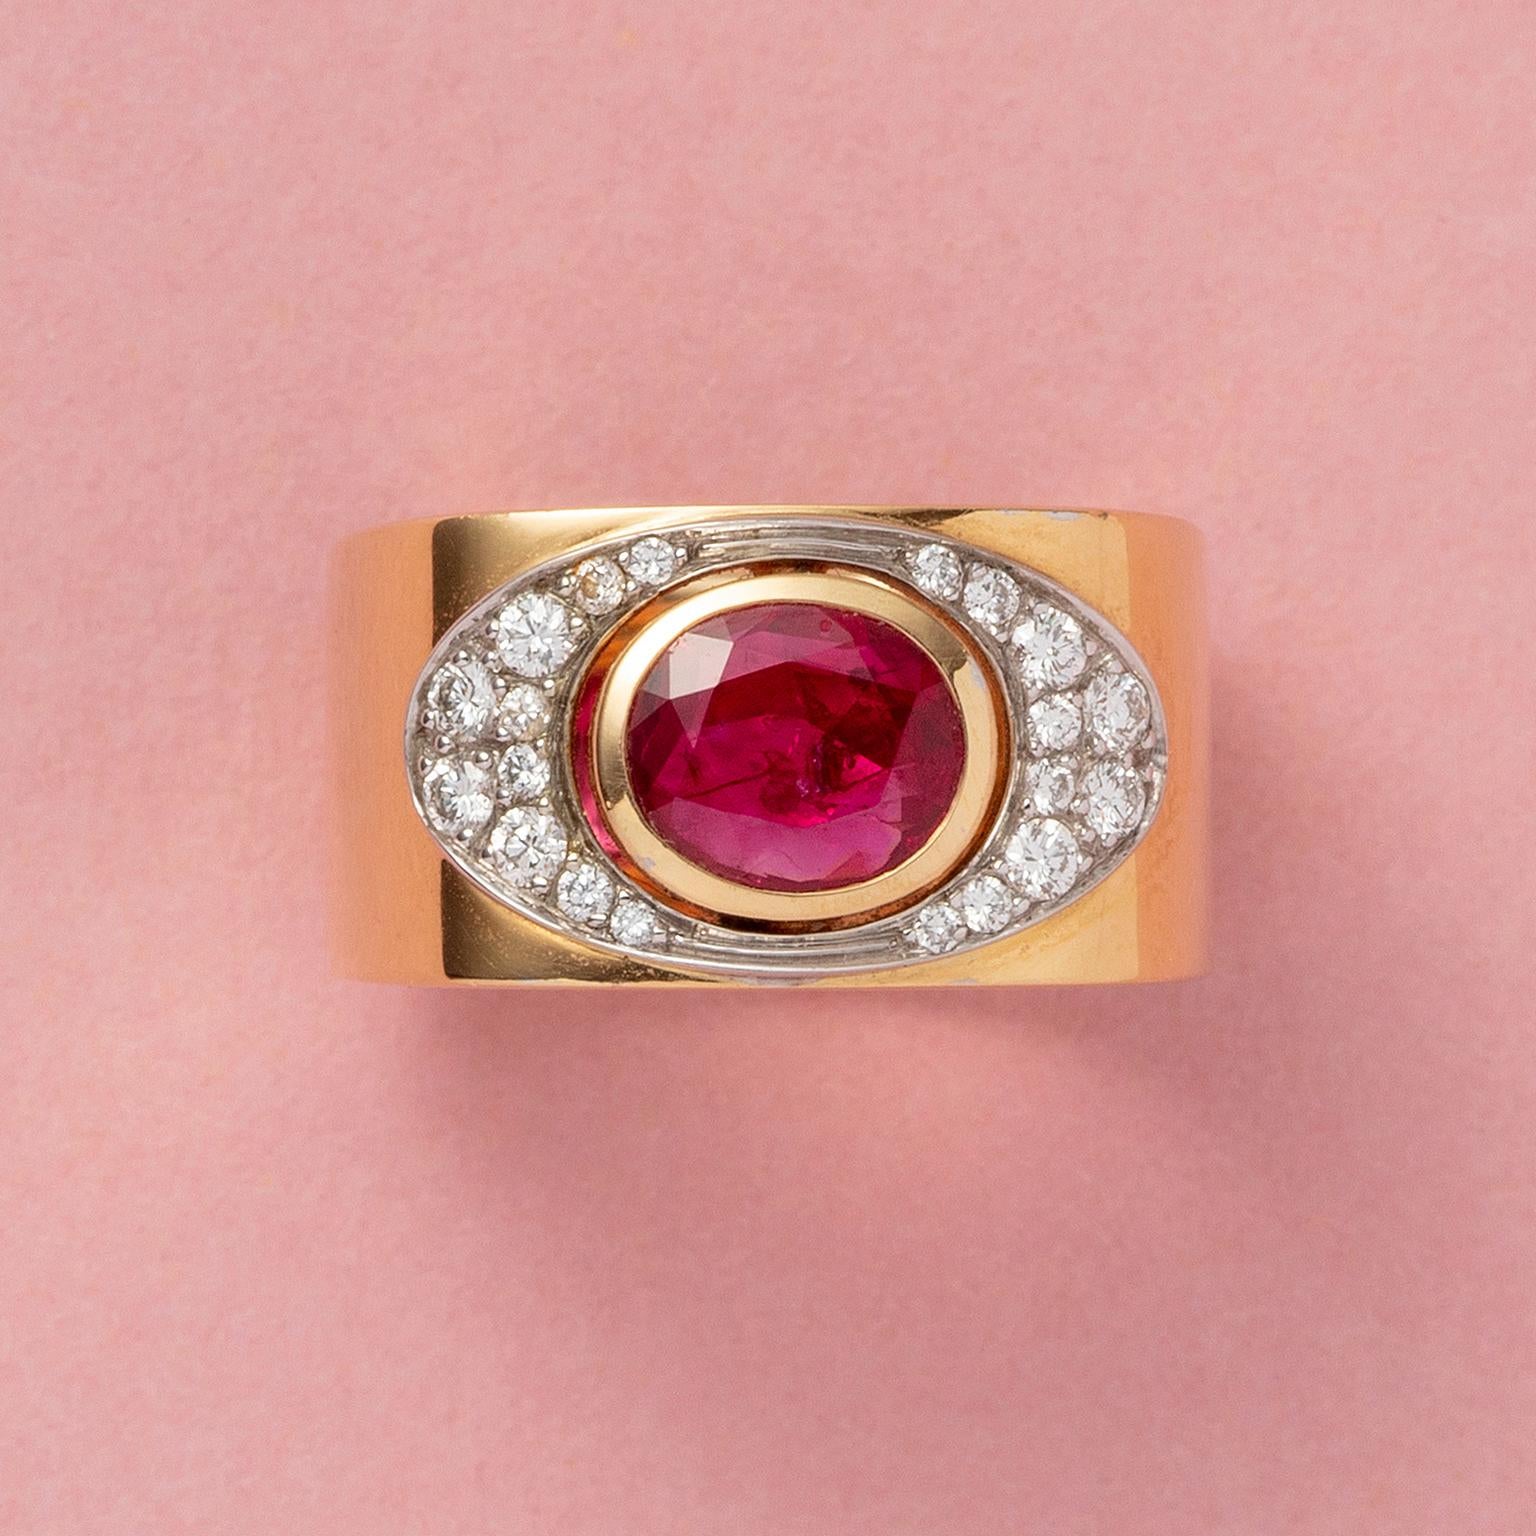 A small 18 carat gold ring set with a facetted oval natural ruby (app. 1.27 carat, unheated Burma) surrounded by brilliant cut diamonds set in white gold (app. 0.22 carat), signed: Trudel, Swiss.
Weight: 14.69 grams
Ringsize:15.25 mm / 4.5 US 
